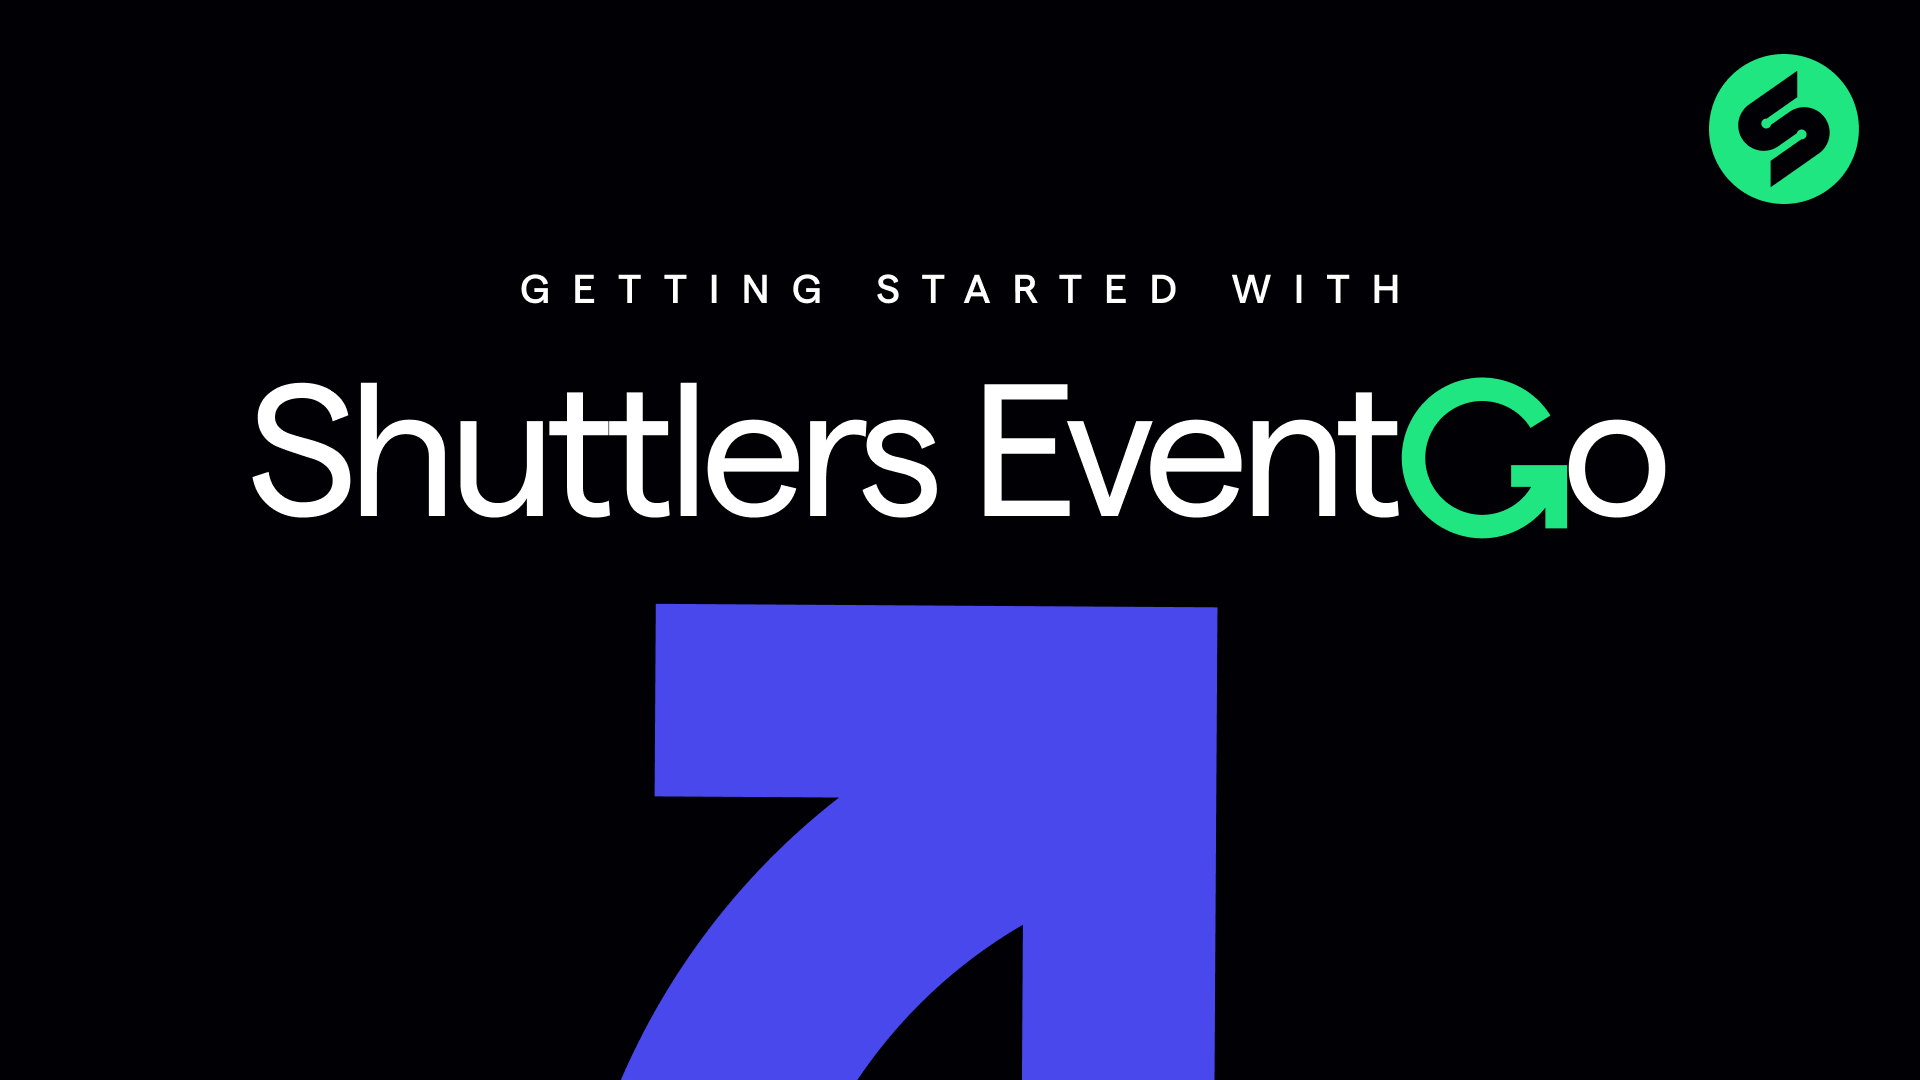 Getting Started With Shuttlers EventGo